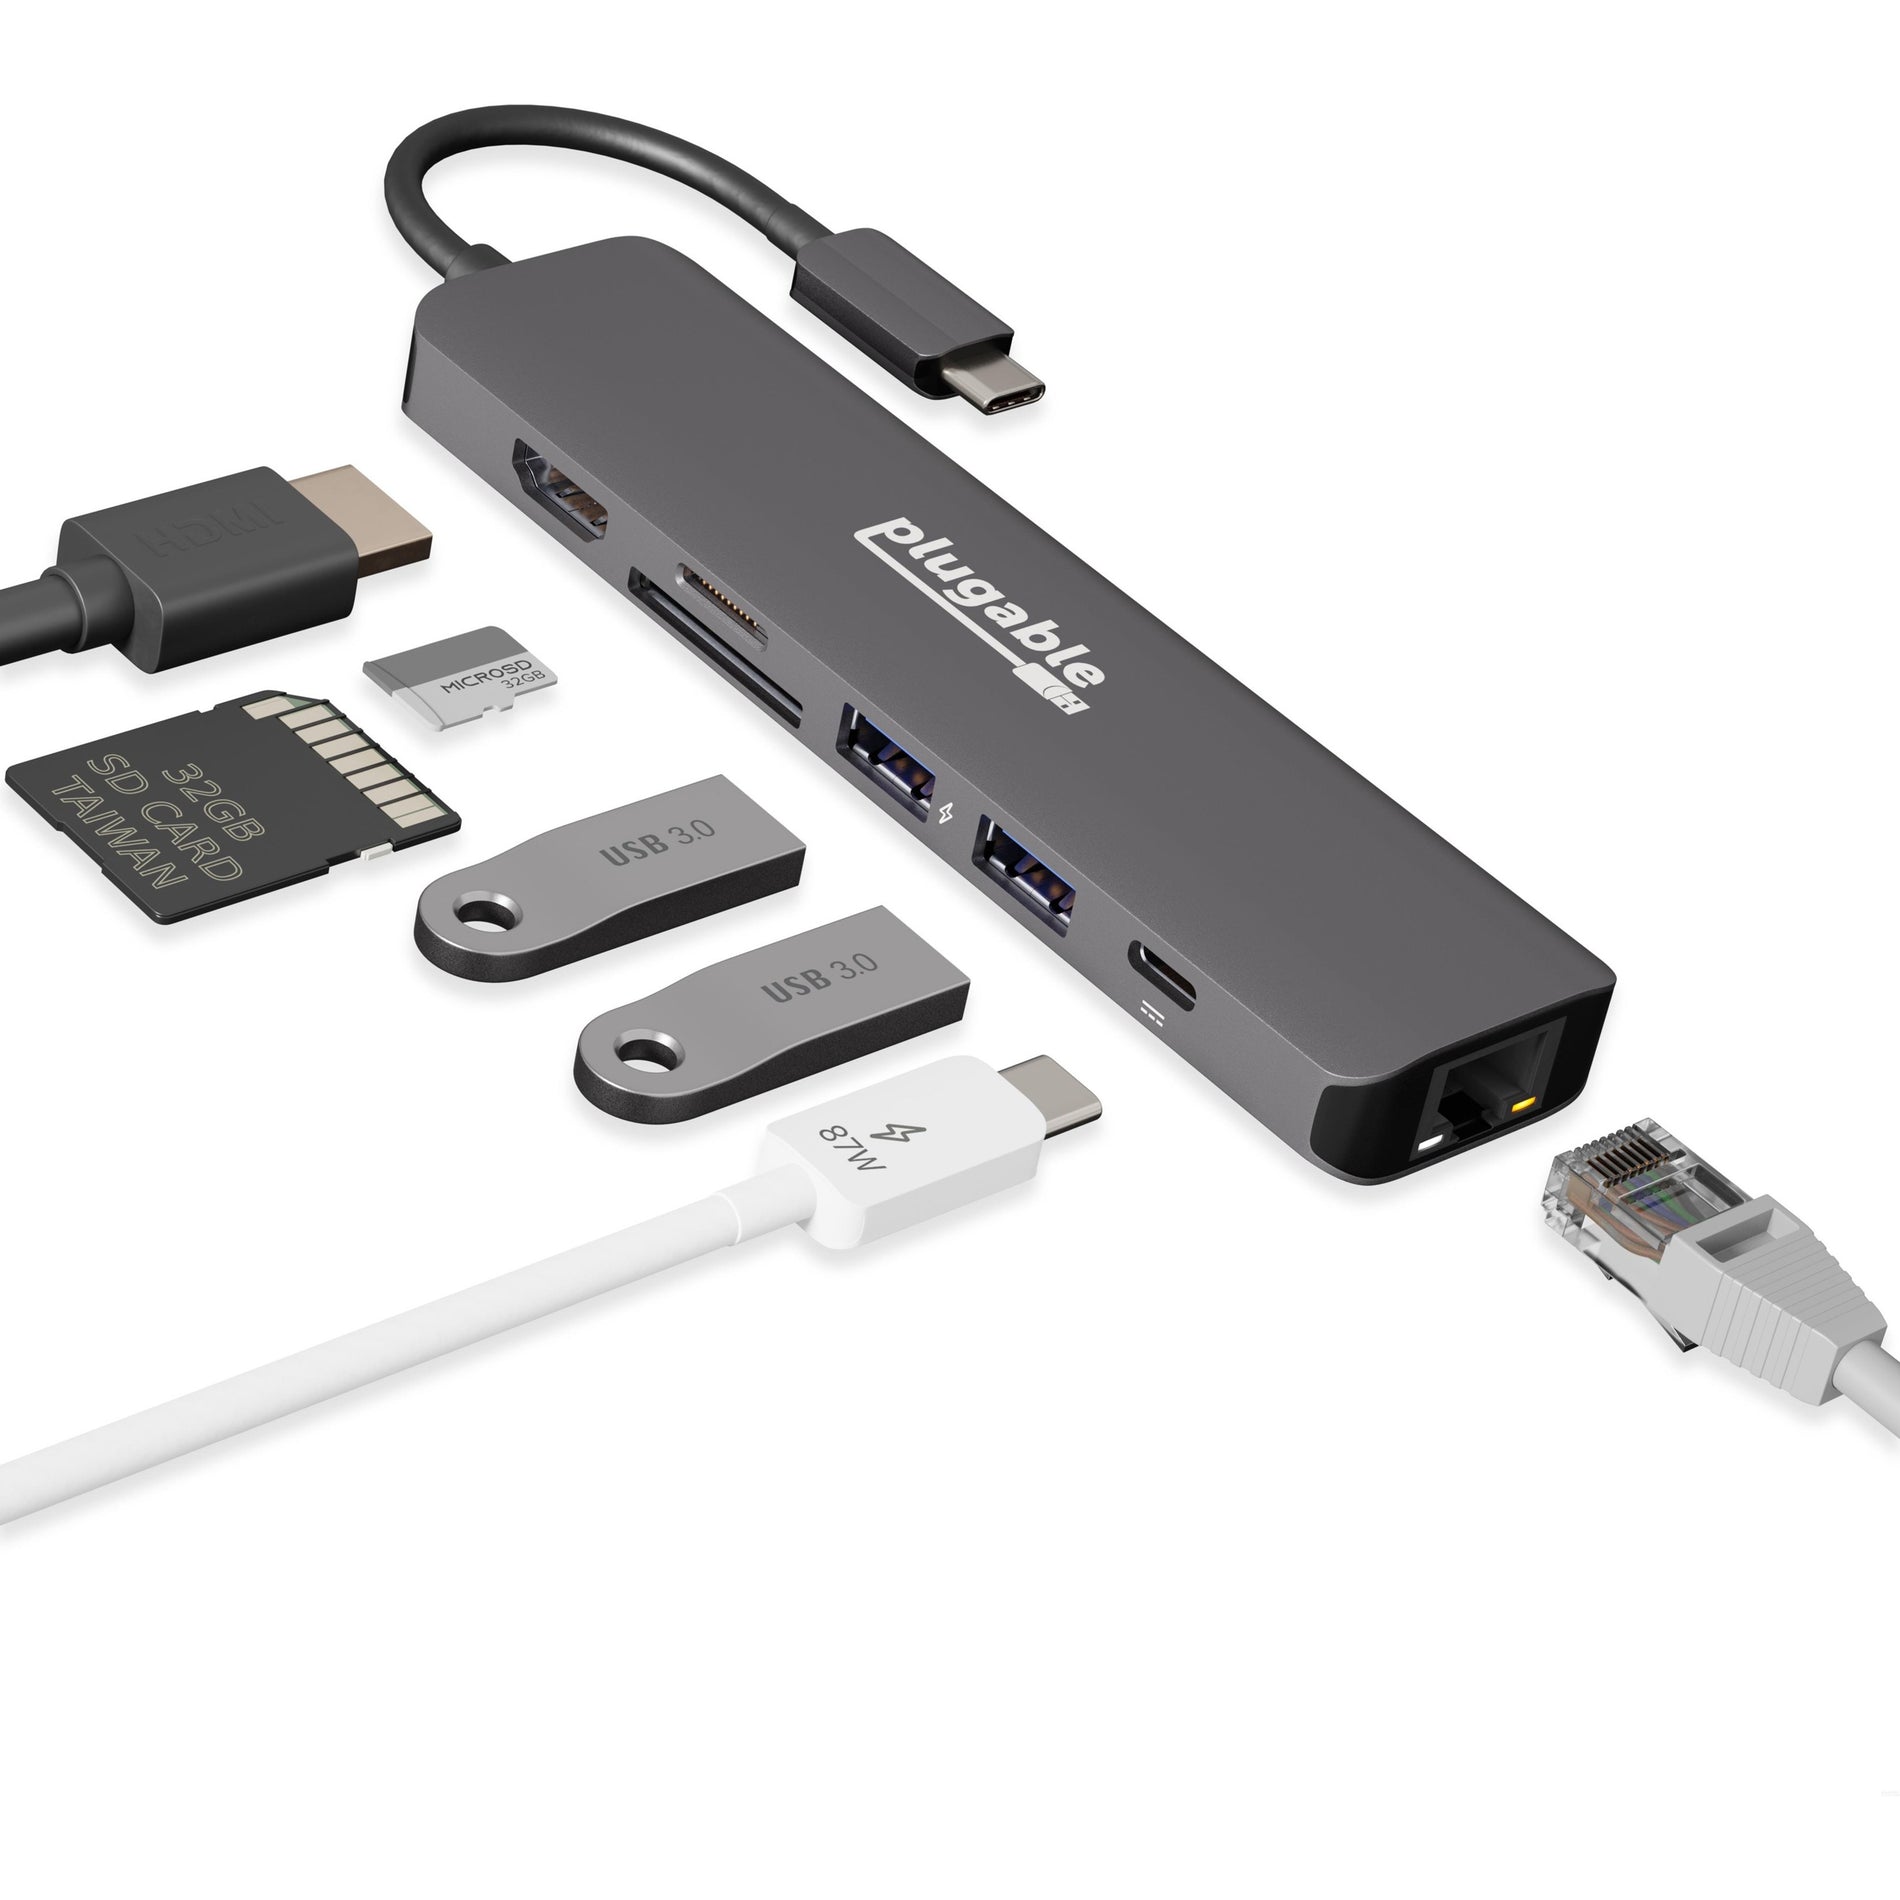 Plugable USBC-7IN1E USB-C 7-in-1 Hub with Ethernet Multiport Adapter für ChromeOS Windows macOS Linux Dell Google Microsoft Apple